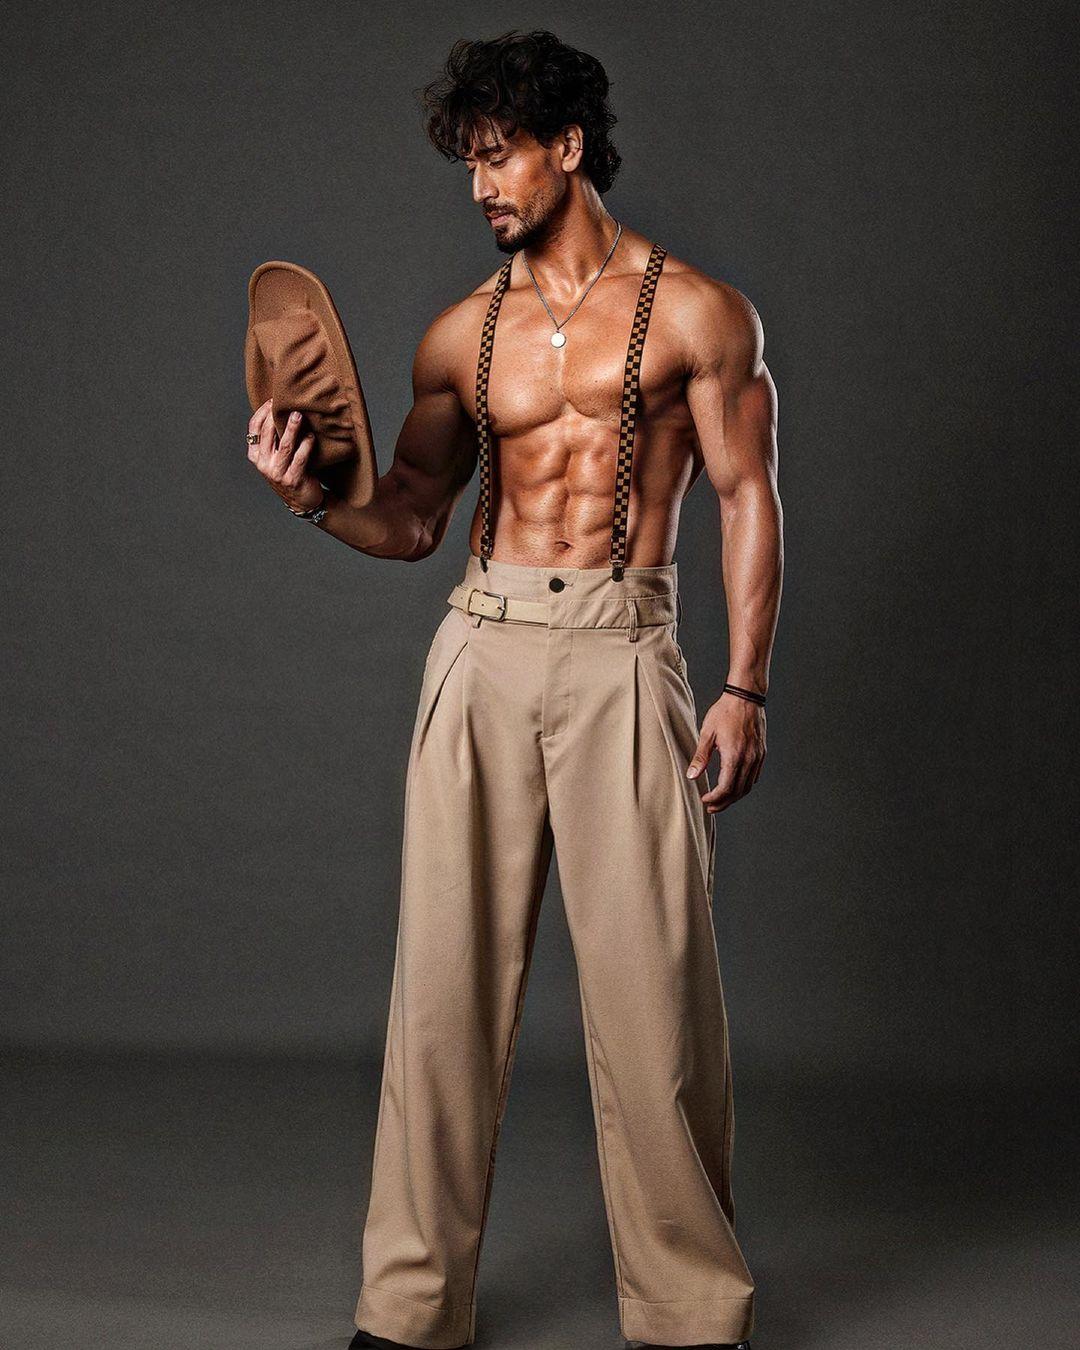 Tiger Shroff places a significant emphasis on heavy weightlifting as part of his fitness routine. 